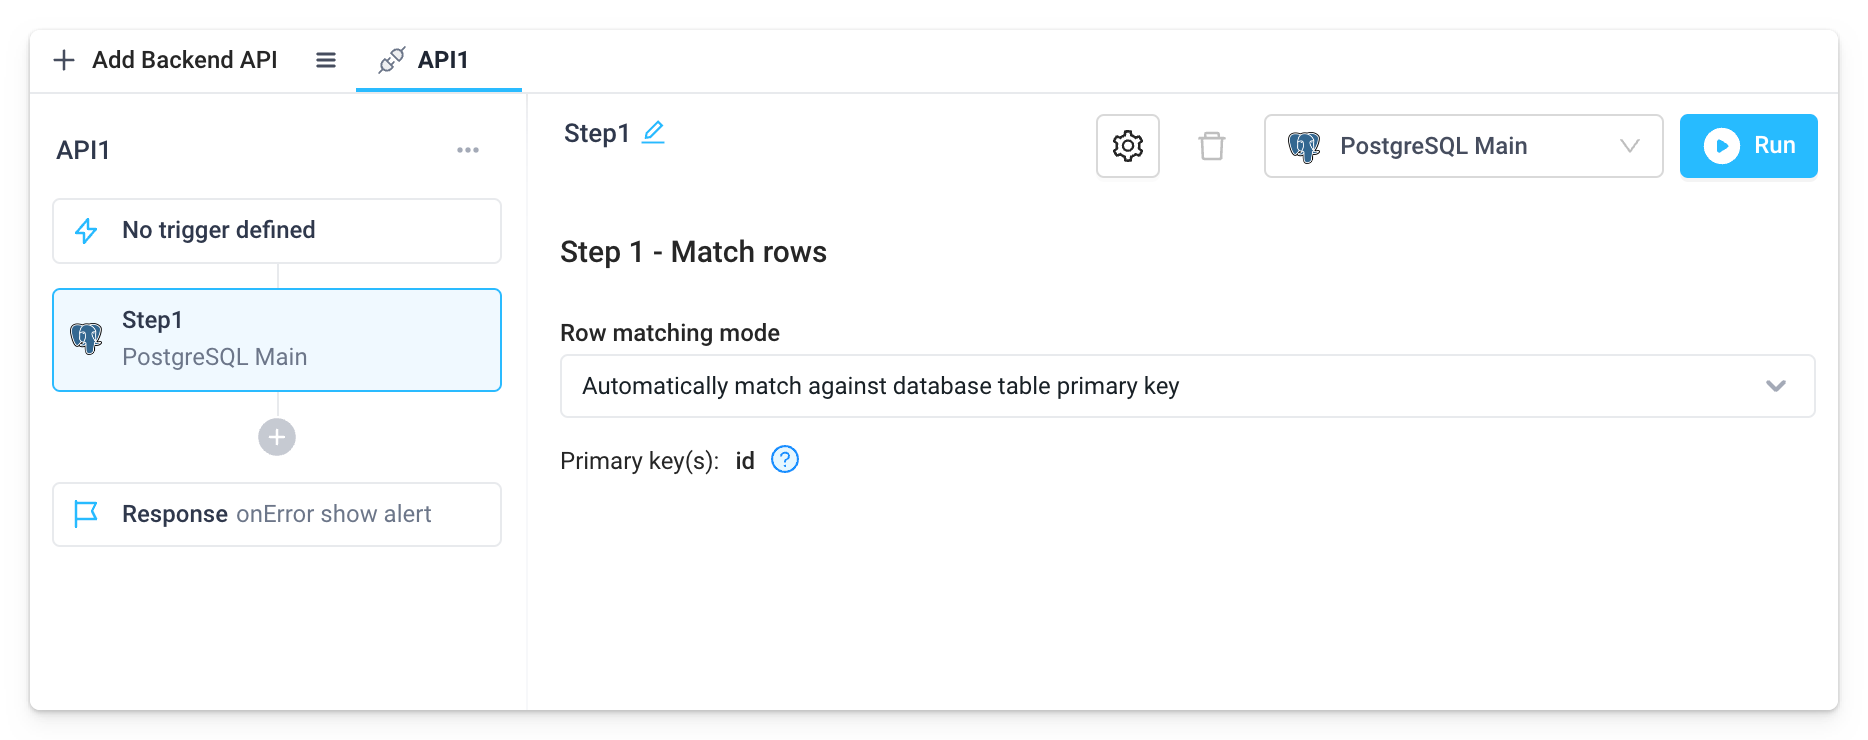 The automatic row matching mode can be picked from a dropdown